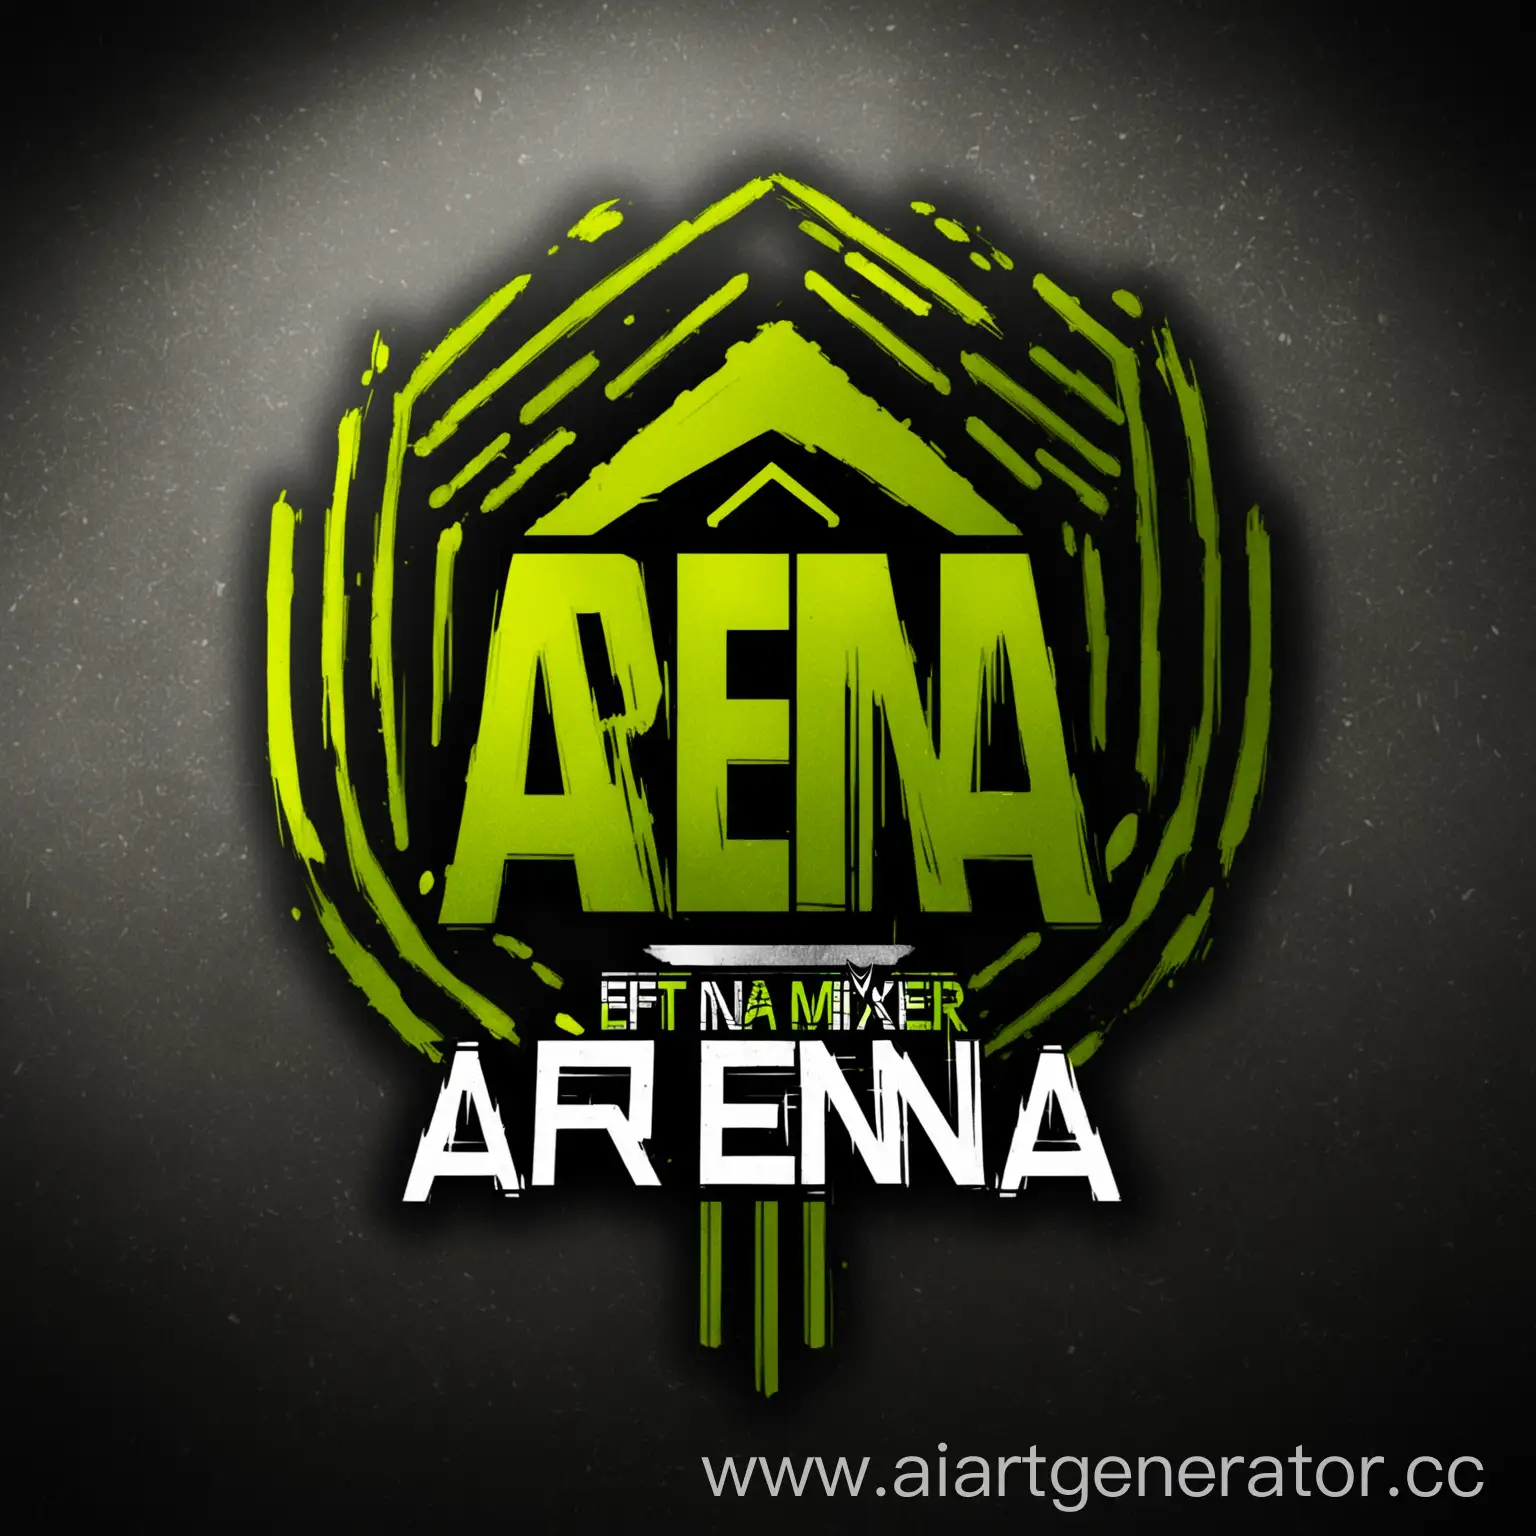 Dynamic-EFT-Arena-Mixer-Logo-with-Vibrant-Colors-and-Exciting-Action